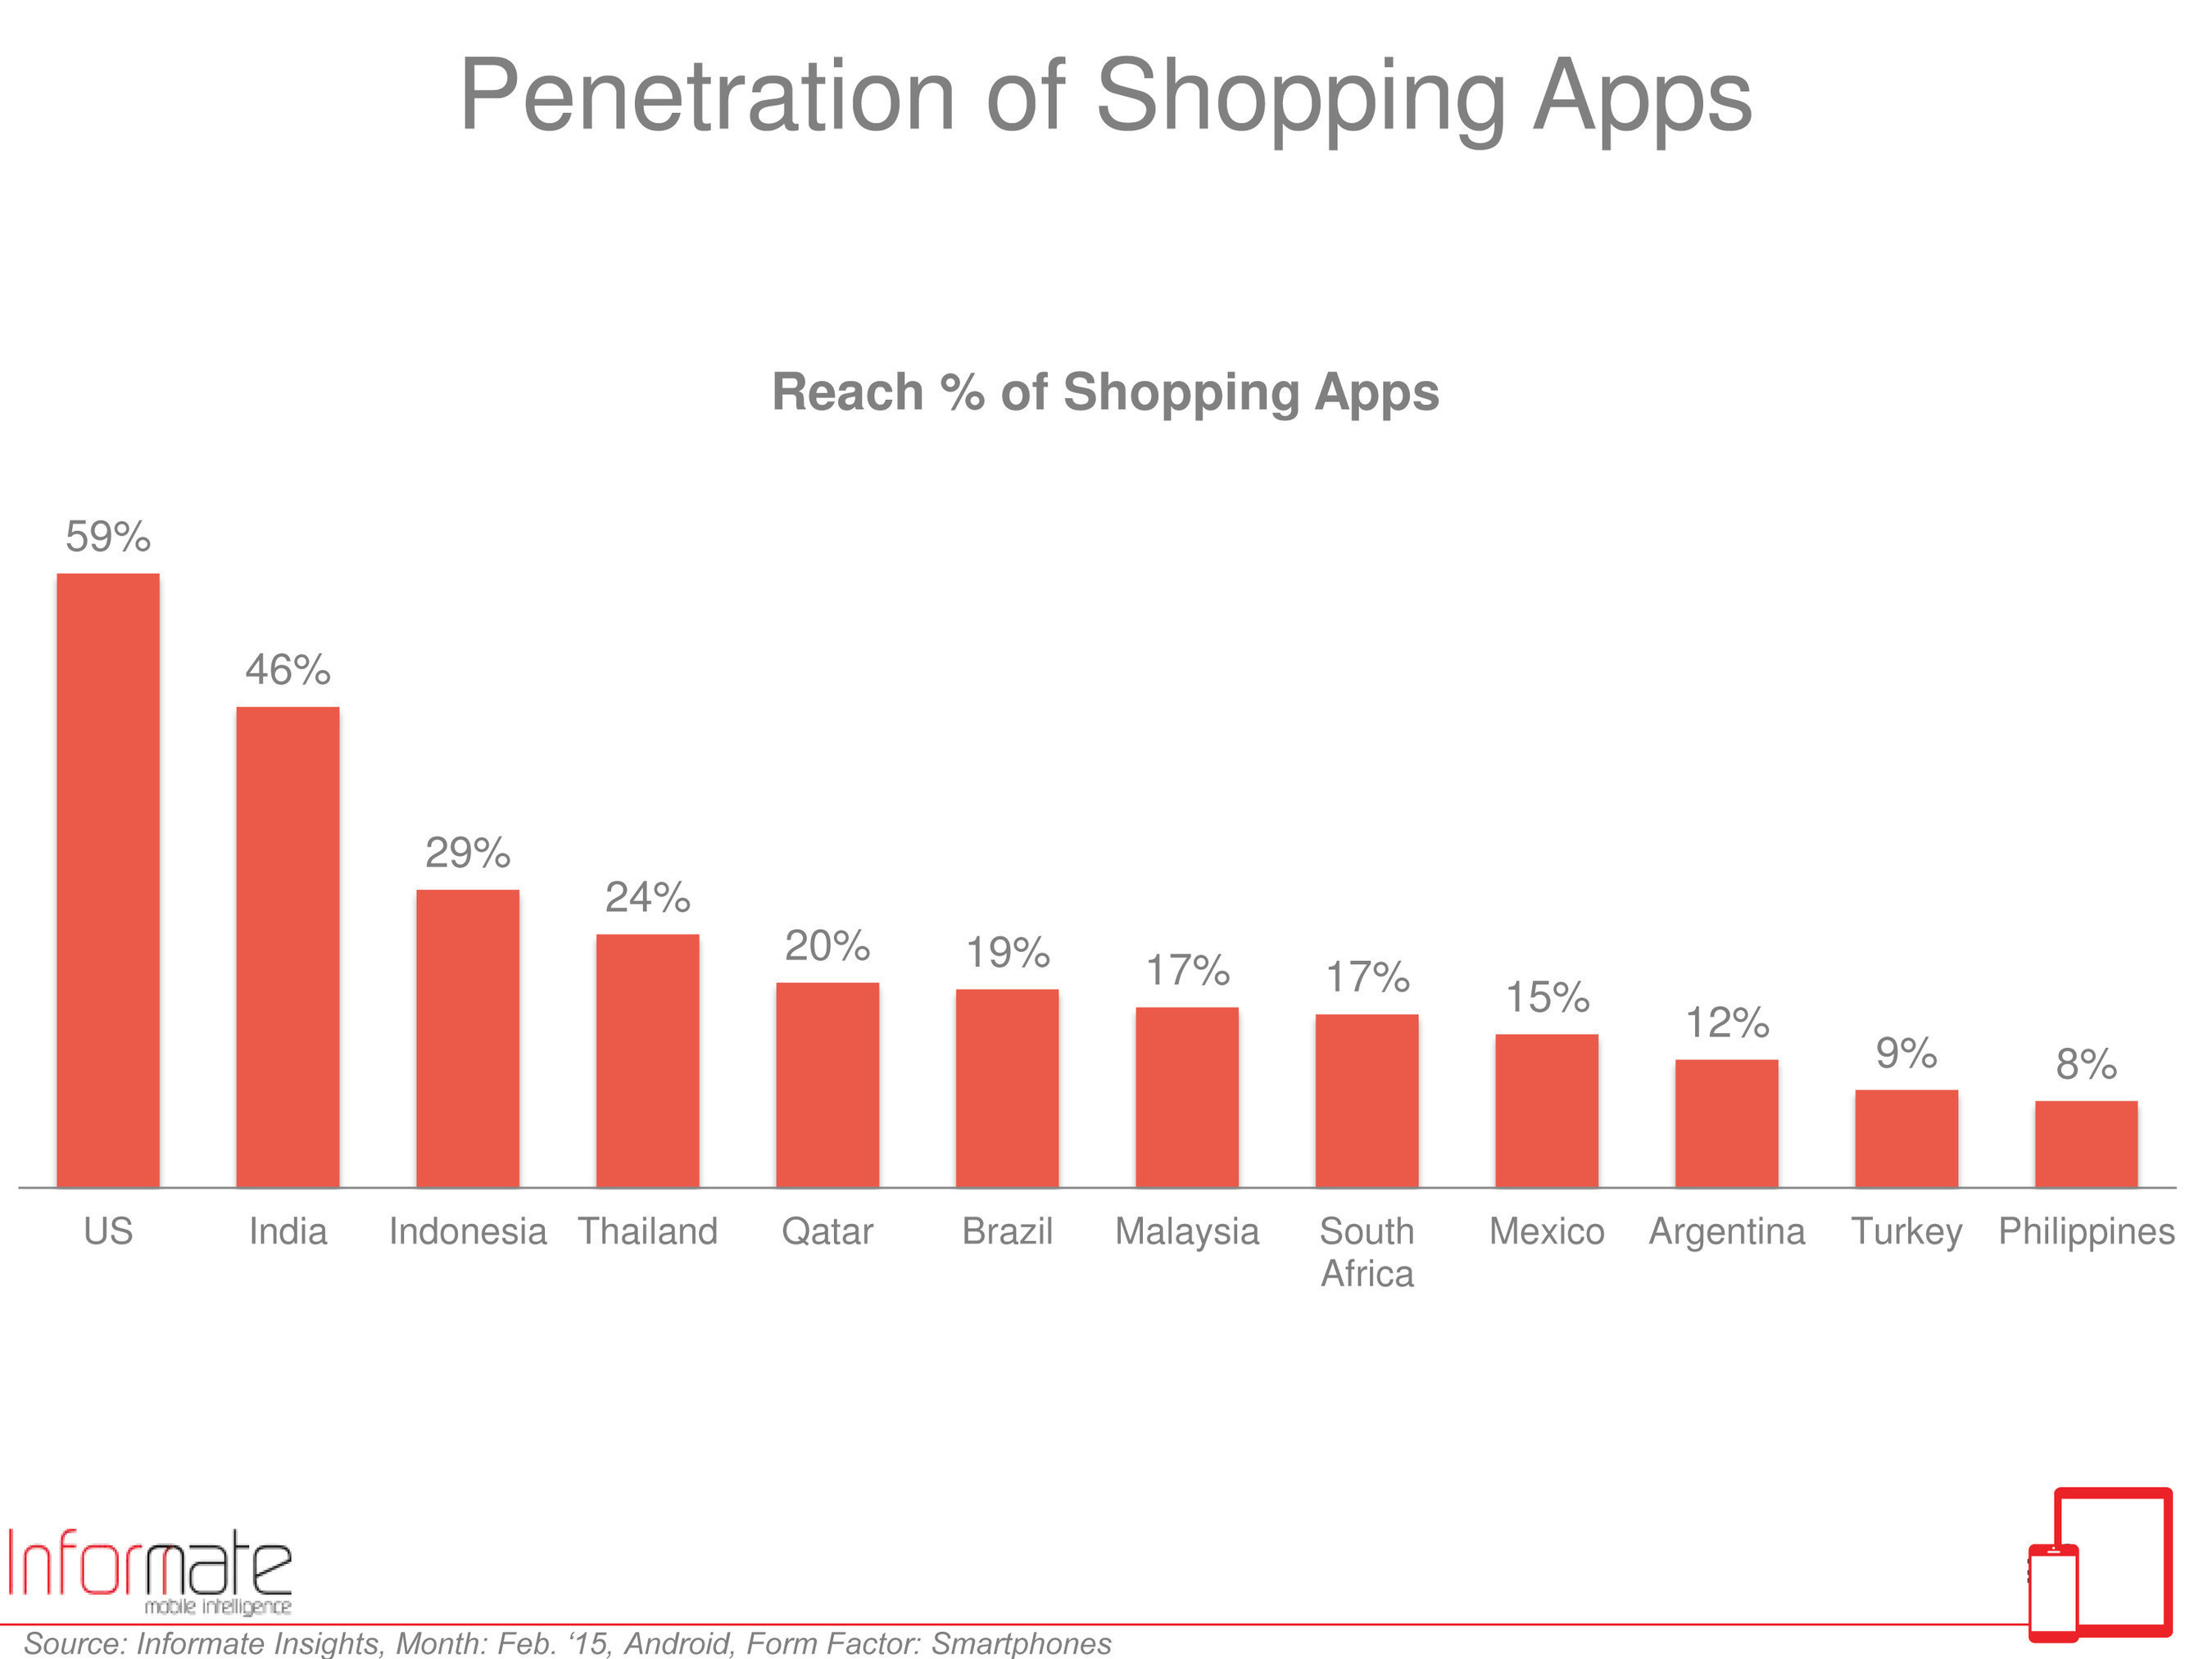 The new International Smartphone Mobility Report reveals shopping apps as having the highest penetration in the U.S. at 60 percent followed by India at 46 percent. The other 10 countries measured, by comparison, only had a median reach of about 18 percent.